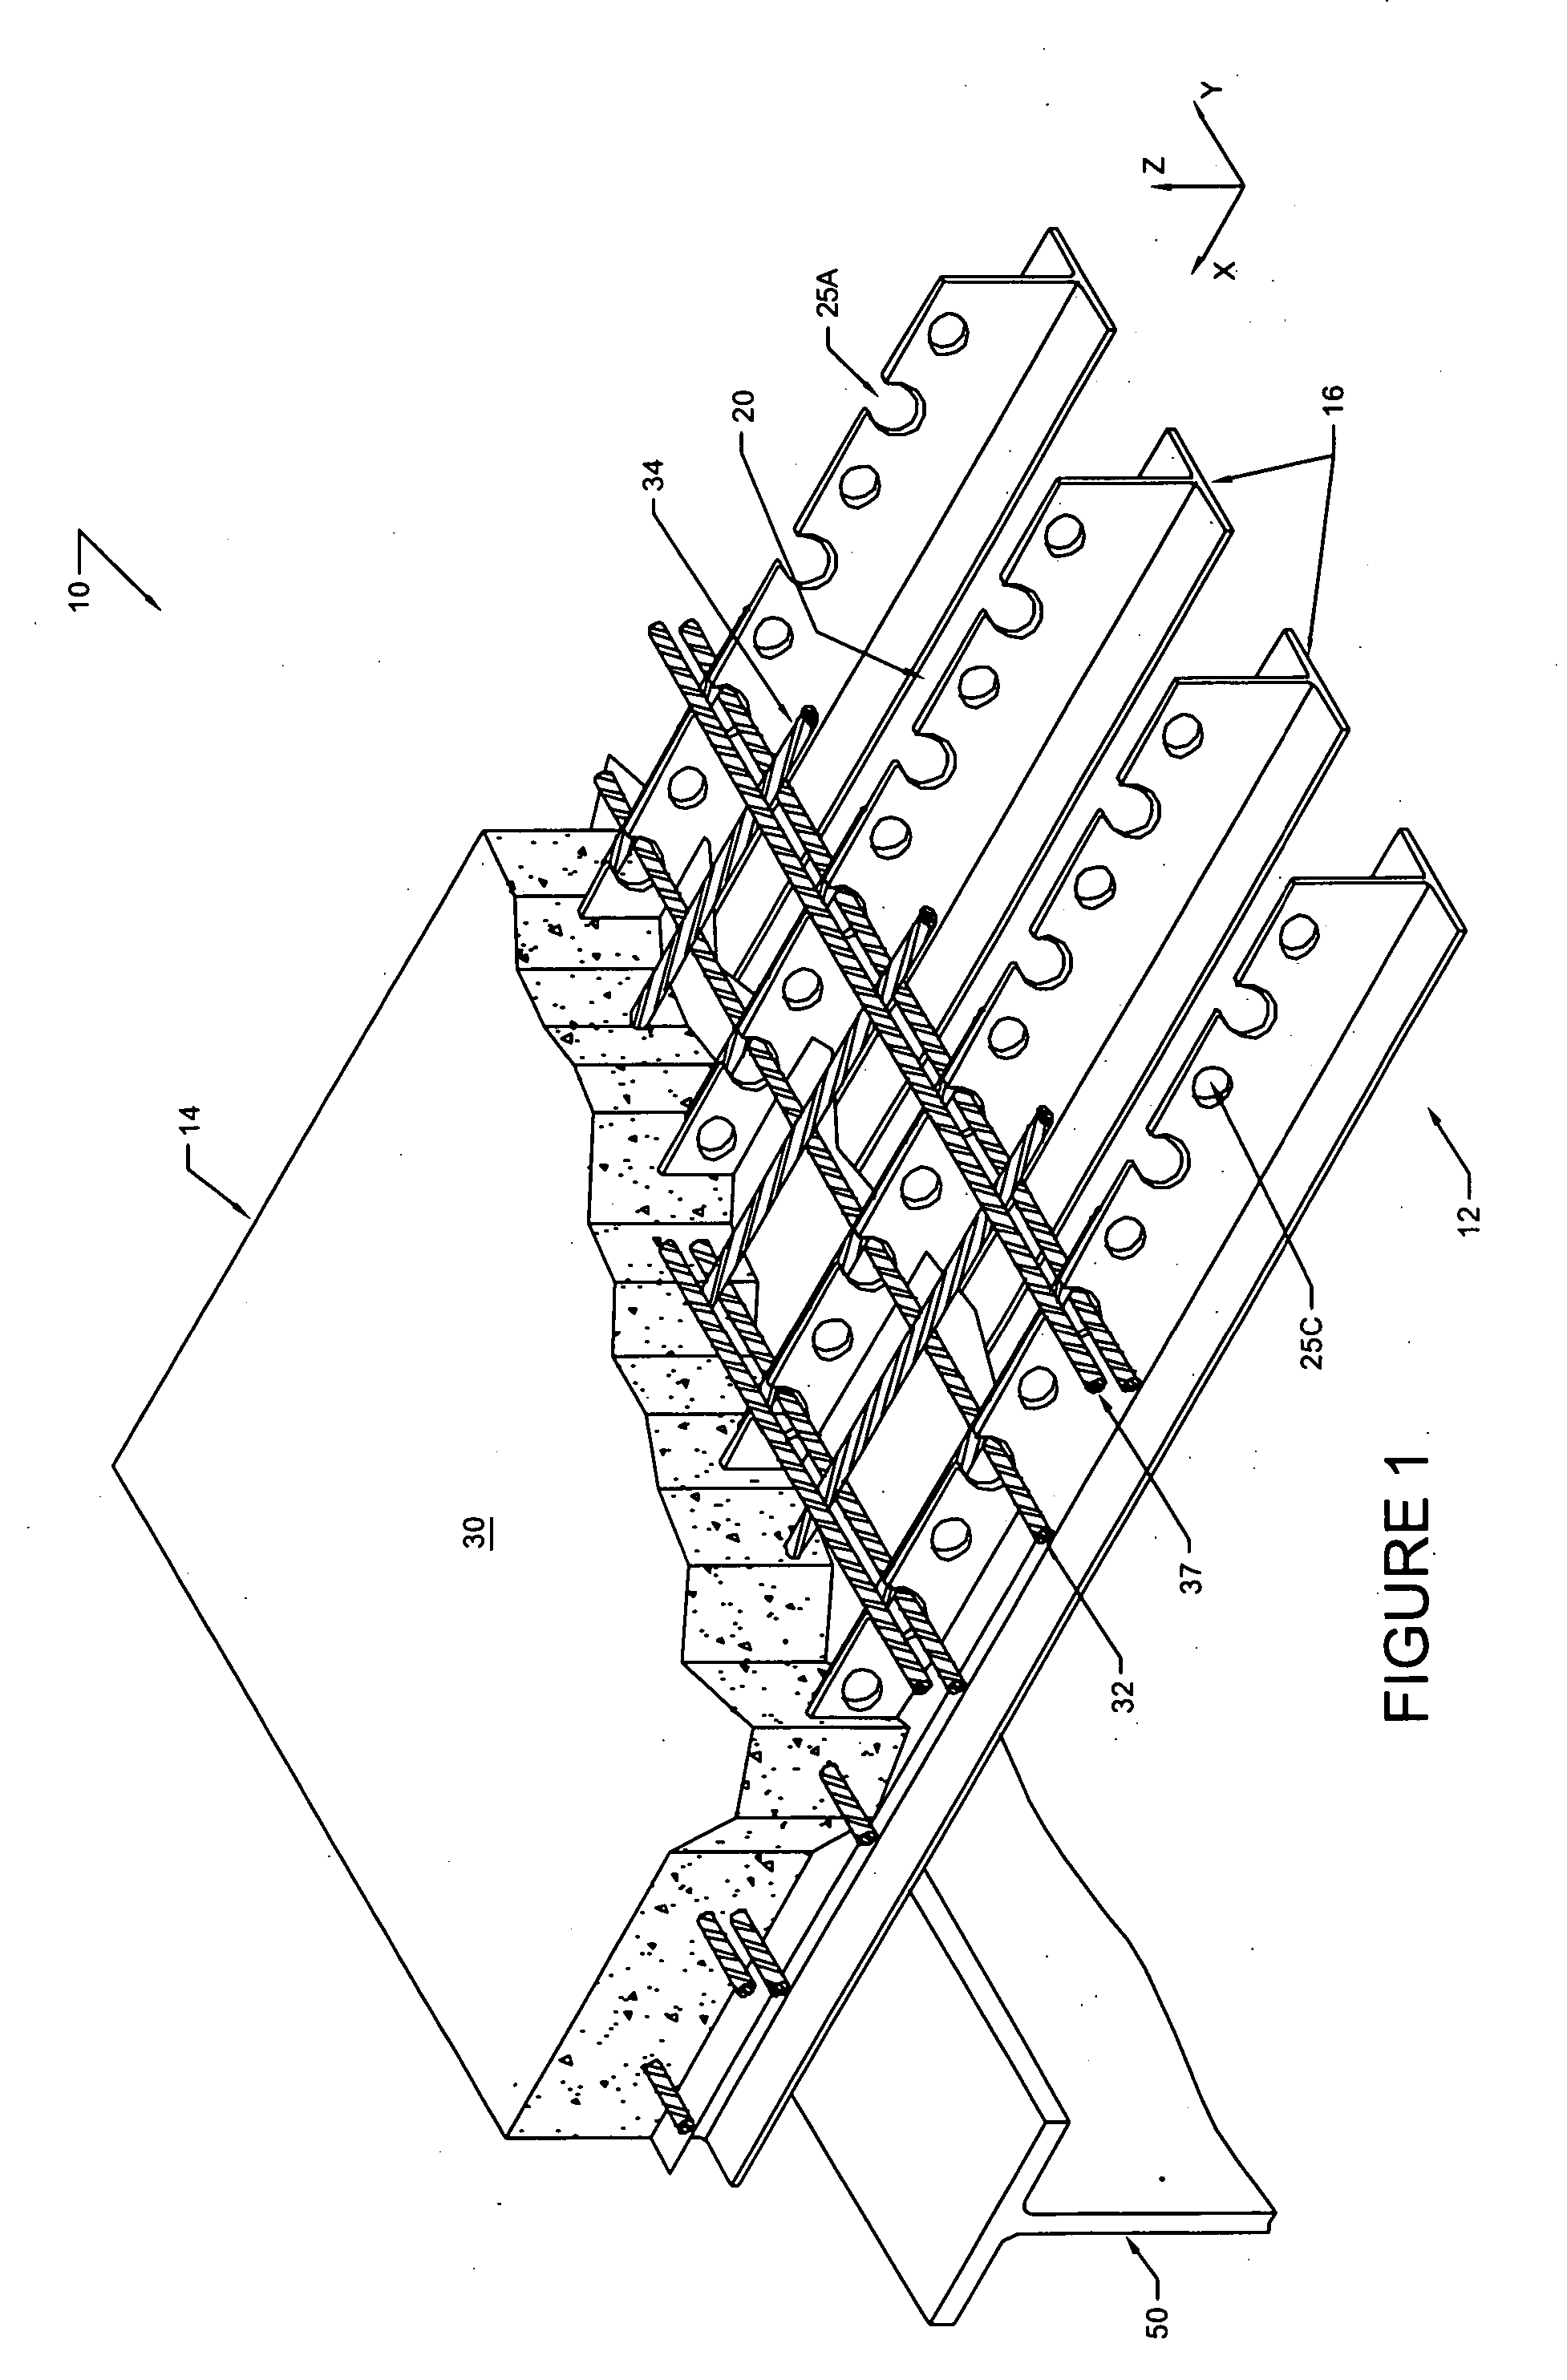 Prestressed or post-tension composite structural system